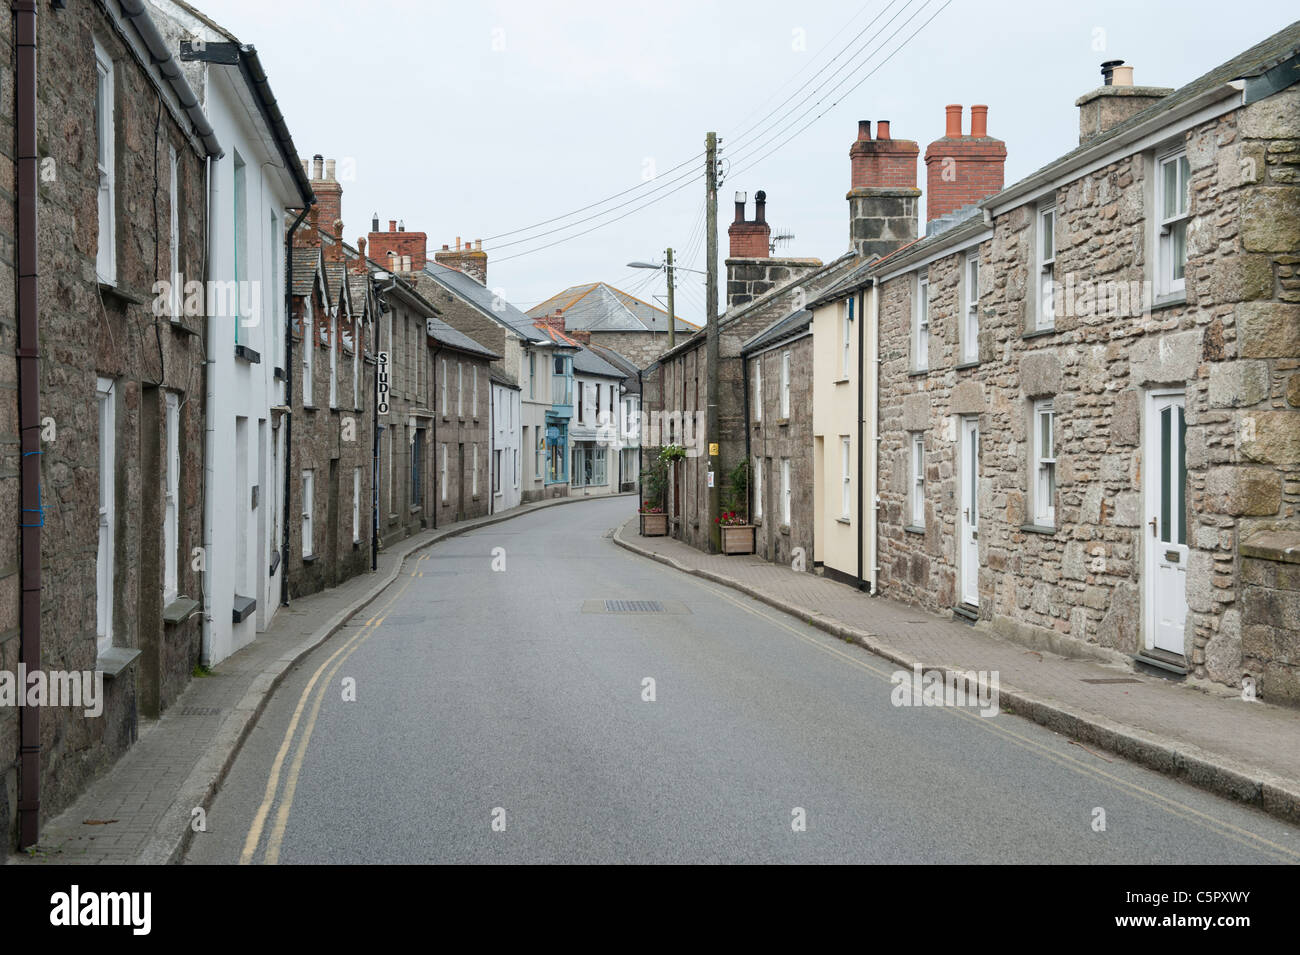 A deserted old-fashioned looking street in St Just, Cornwall. Stock Photo